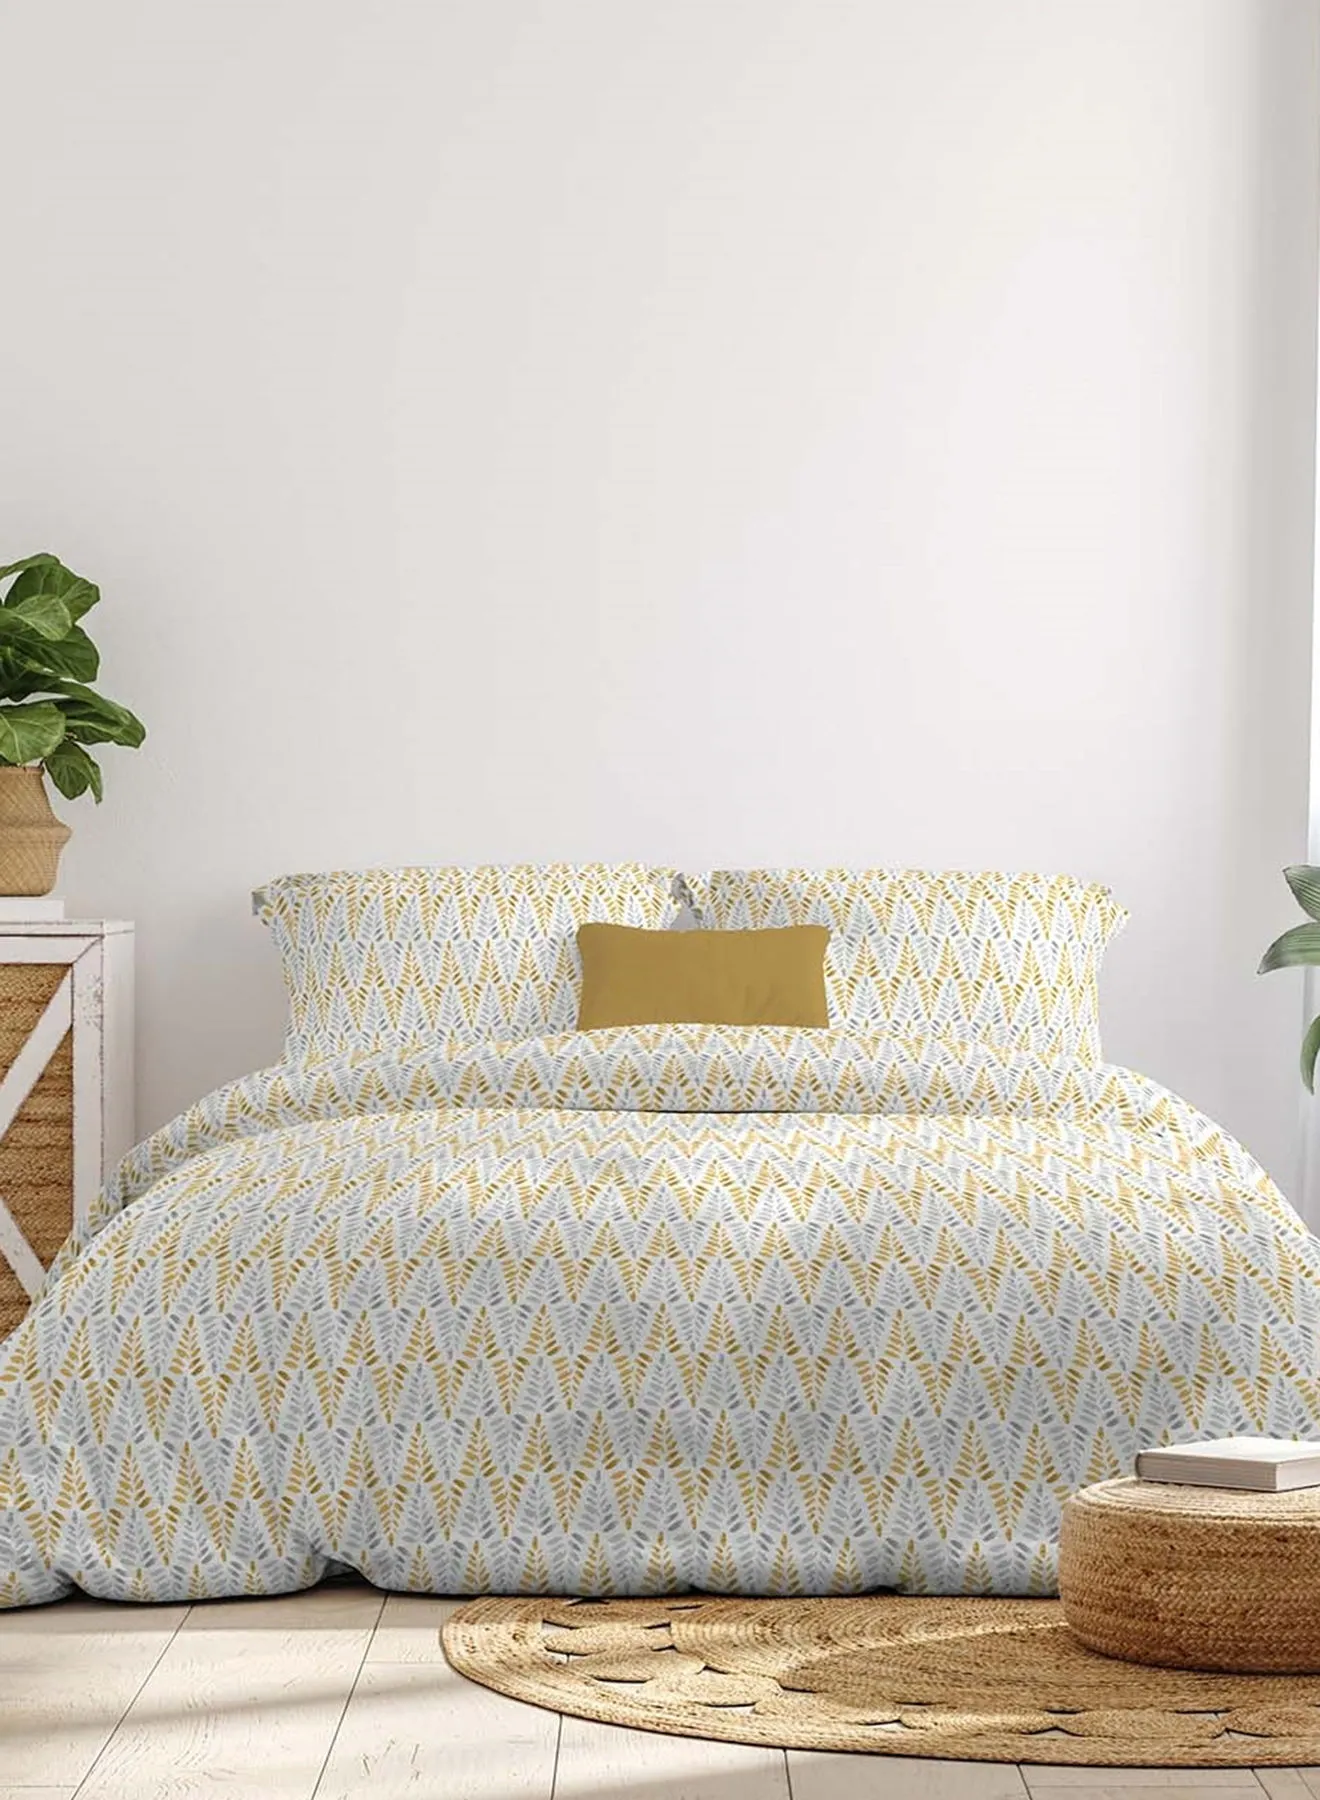 Amal Comforter Set Queen Size All Season Everyday Use Bedding Set 100% Cotton 3 Pieces 1 Comforter 2 Pillow Covers  Gold